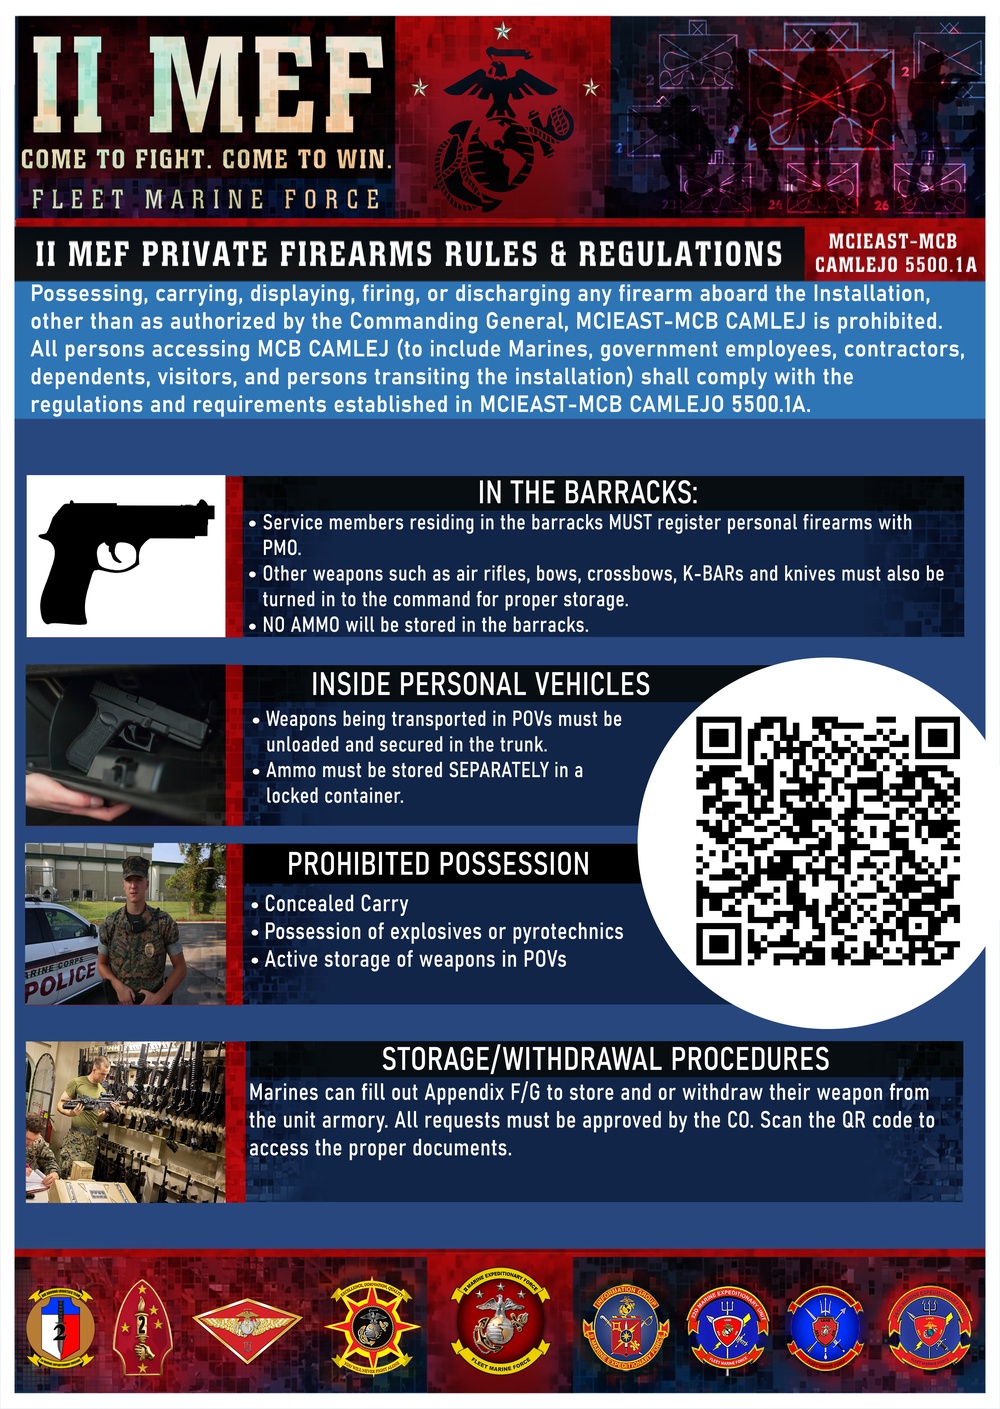 II MEF Private Firearms Rules and Regulations